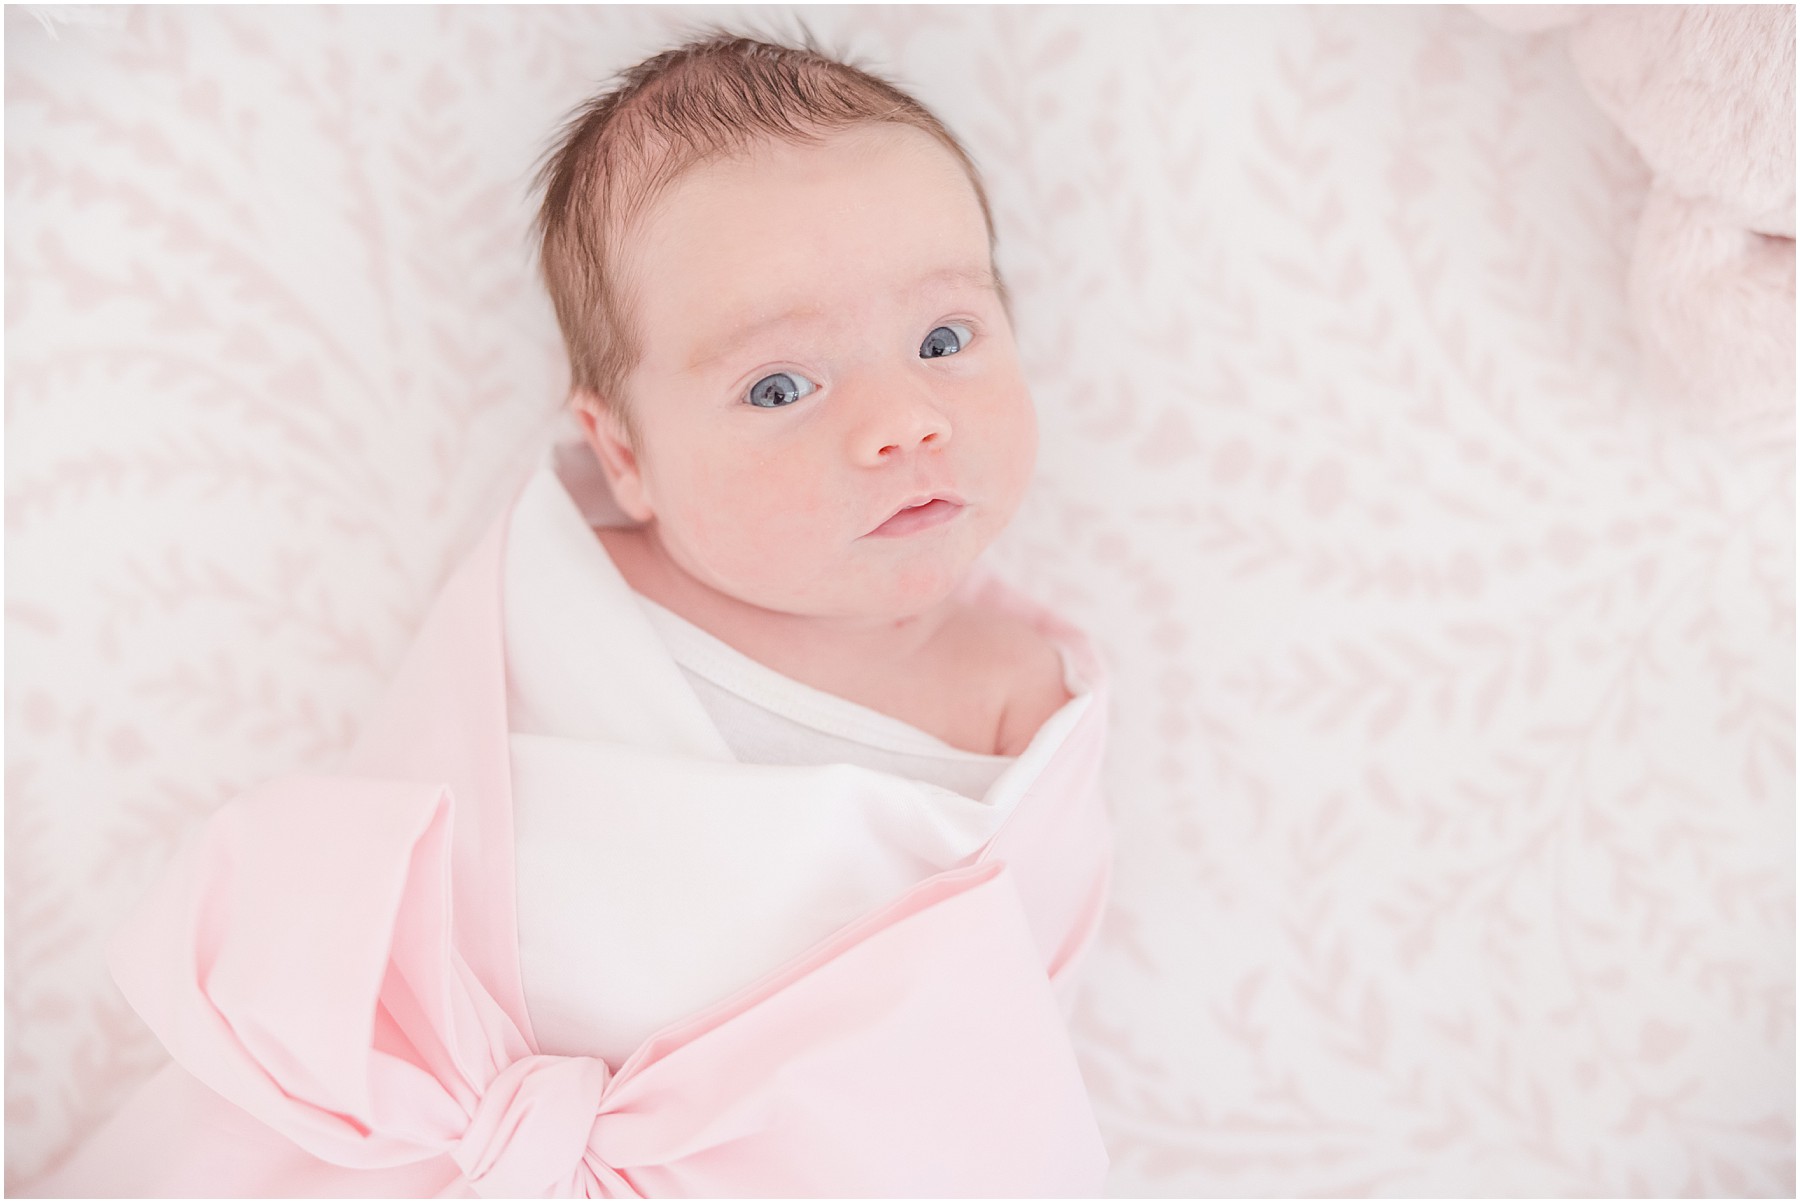 A baby in a pink bow swaddle gazes toward the camera.